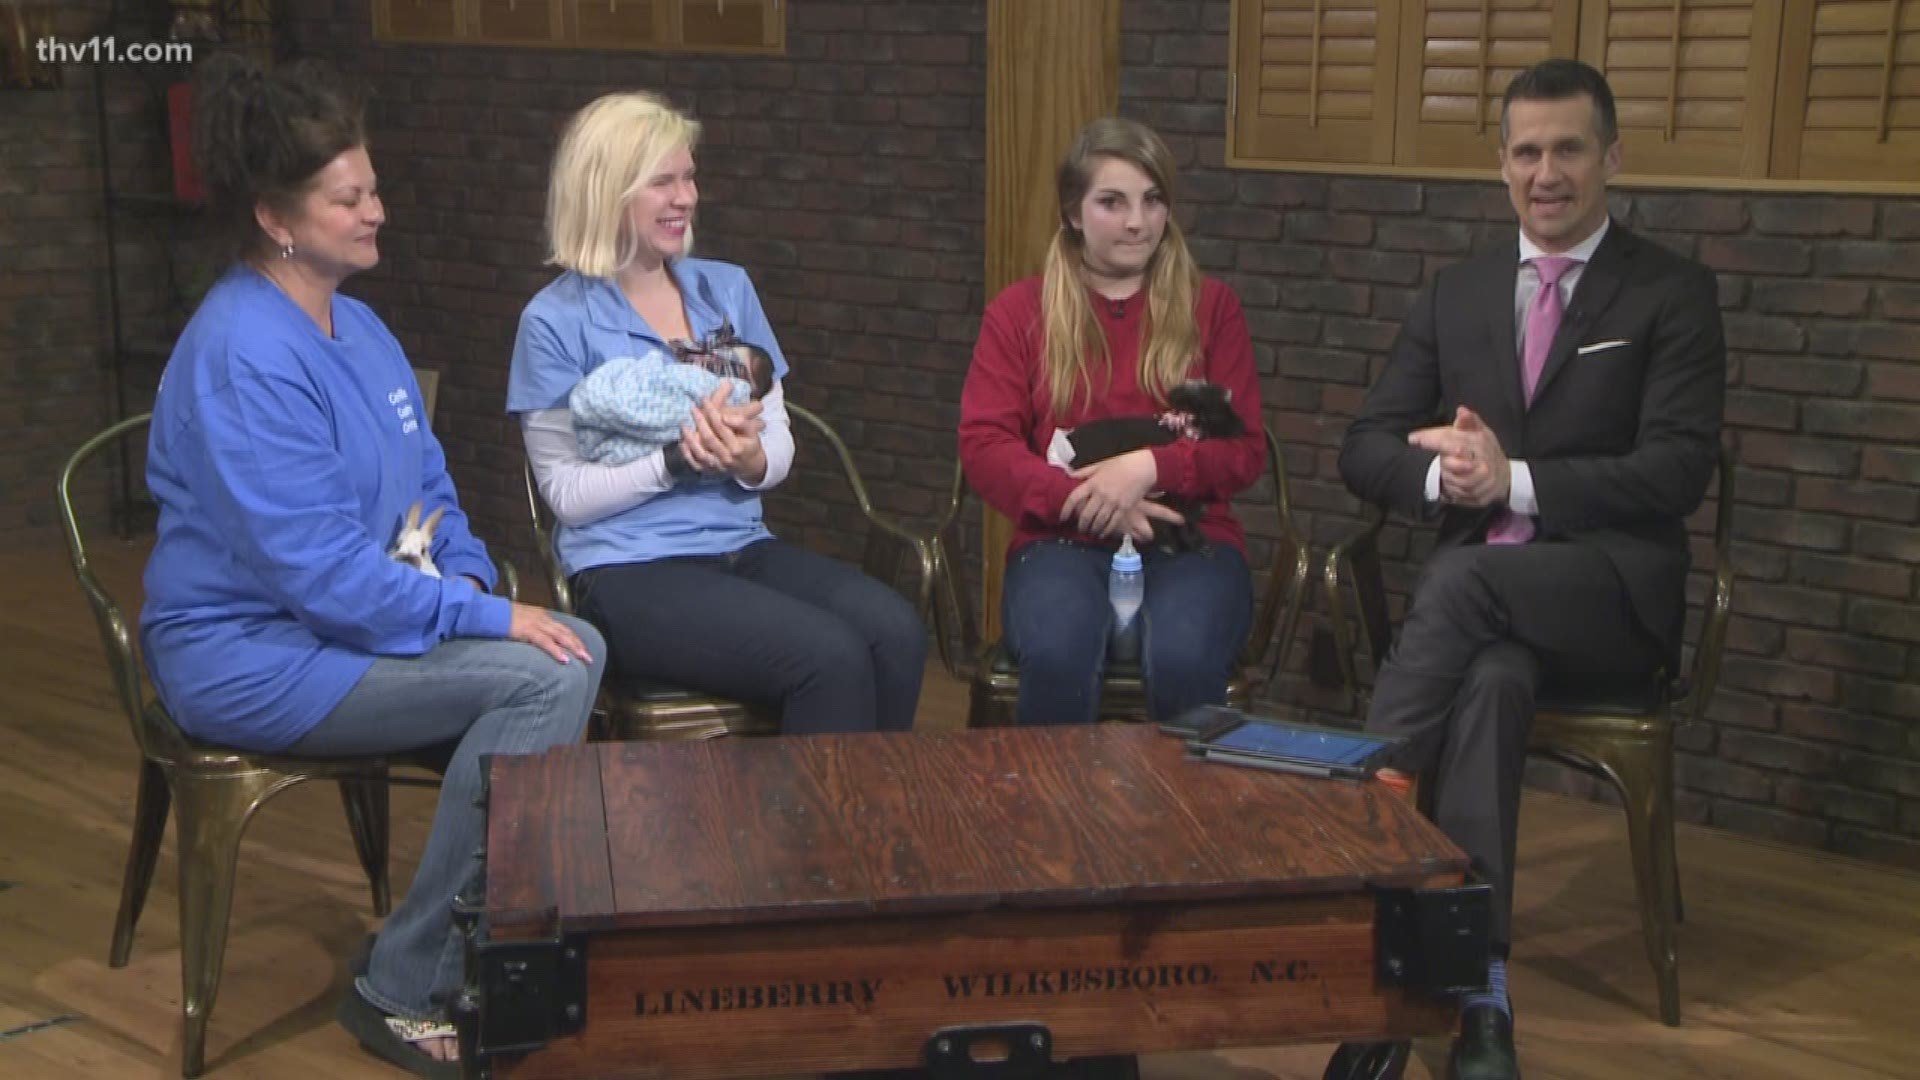 A three-day-old Shetland sheep, a bunny and a baby pig all joined THV11 This Morning to give people a taste of what's to come at Springfest this year.